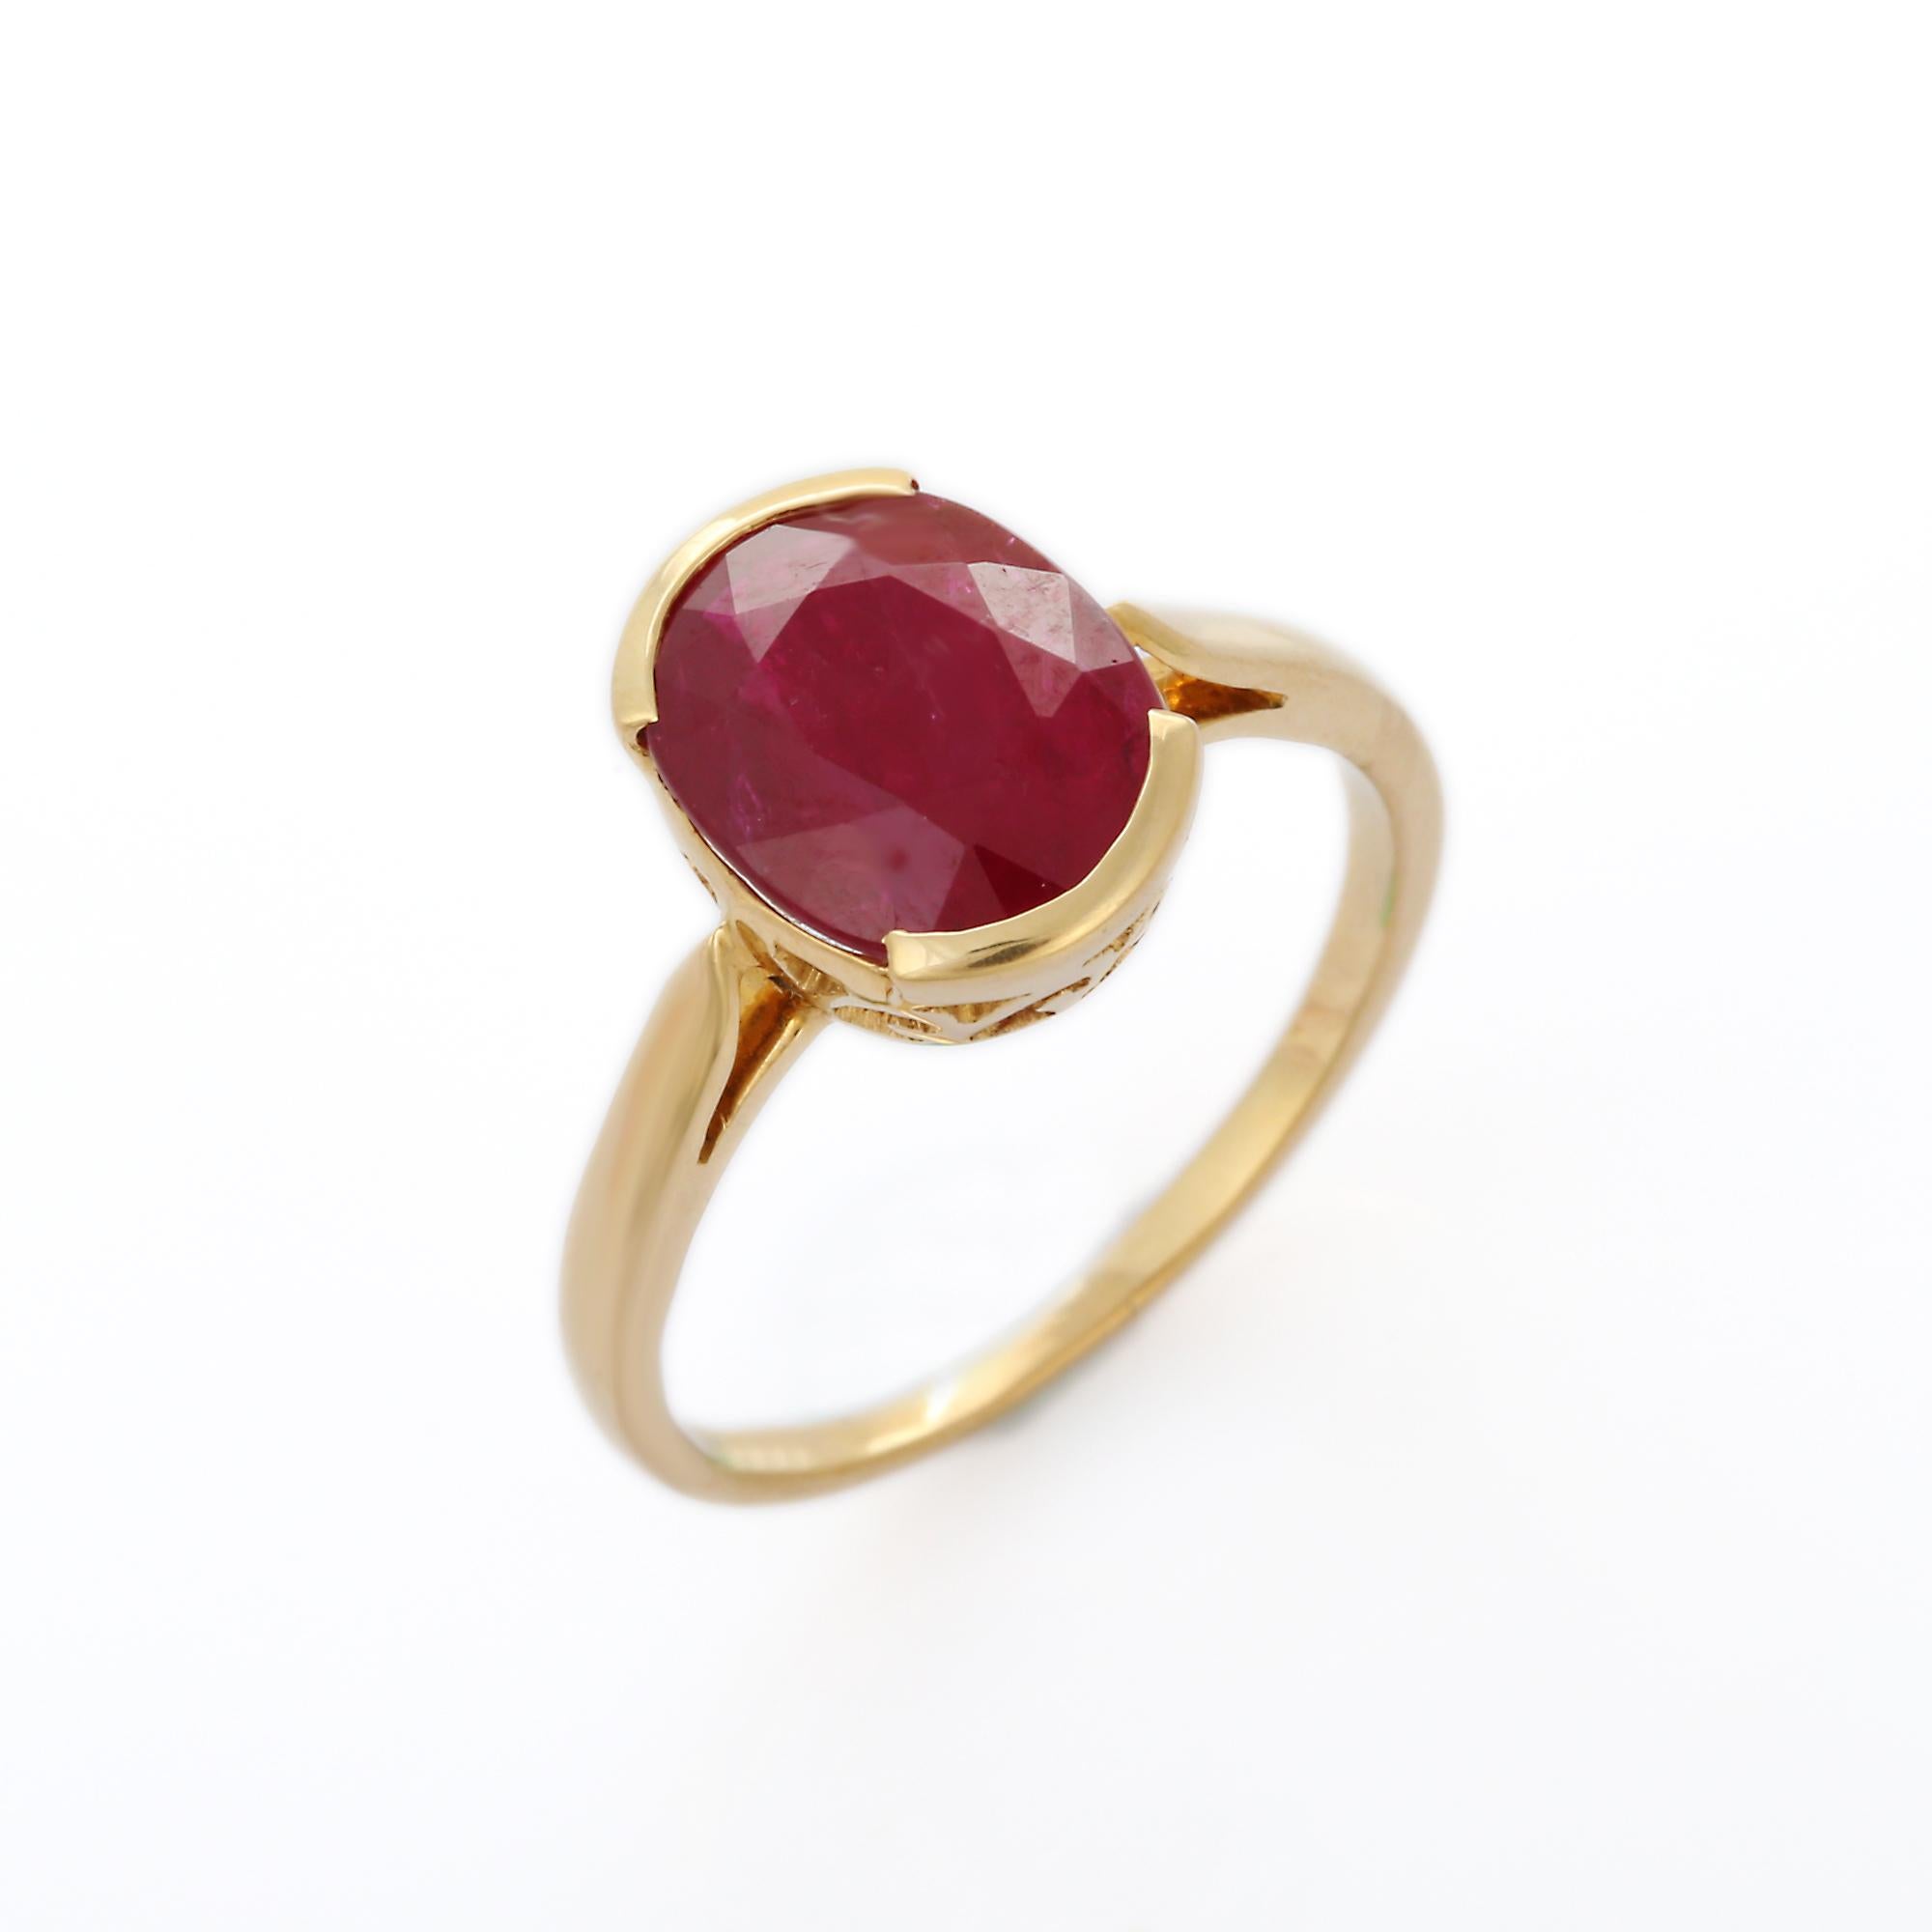 For Sale:  Contemporary Style 3.59 Carat Ruby Oval Cut Cocktail Ring in 14K Yellow Gold   11